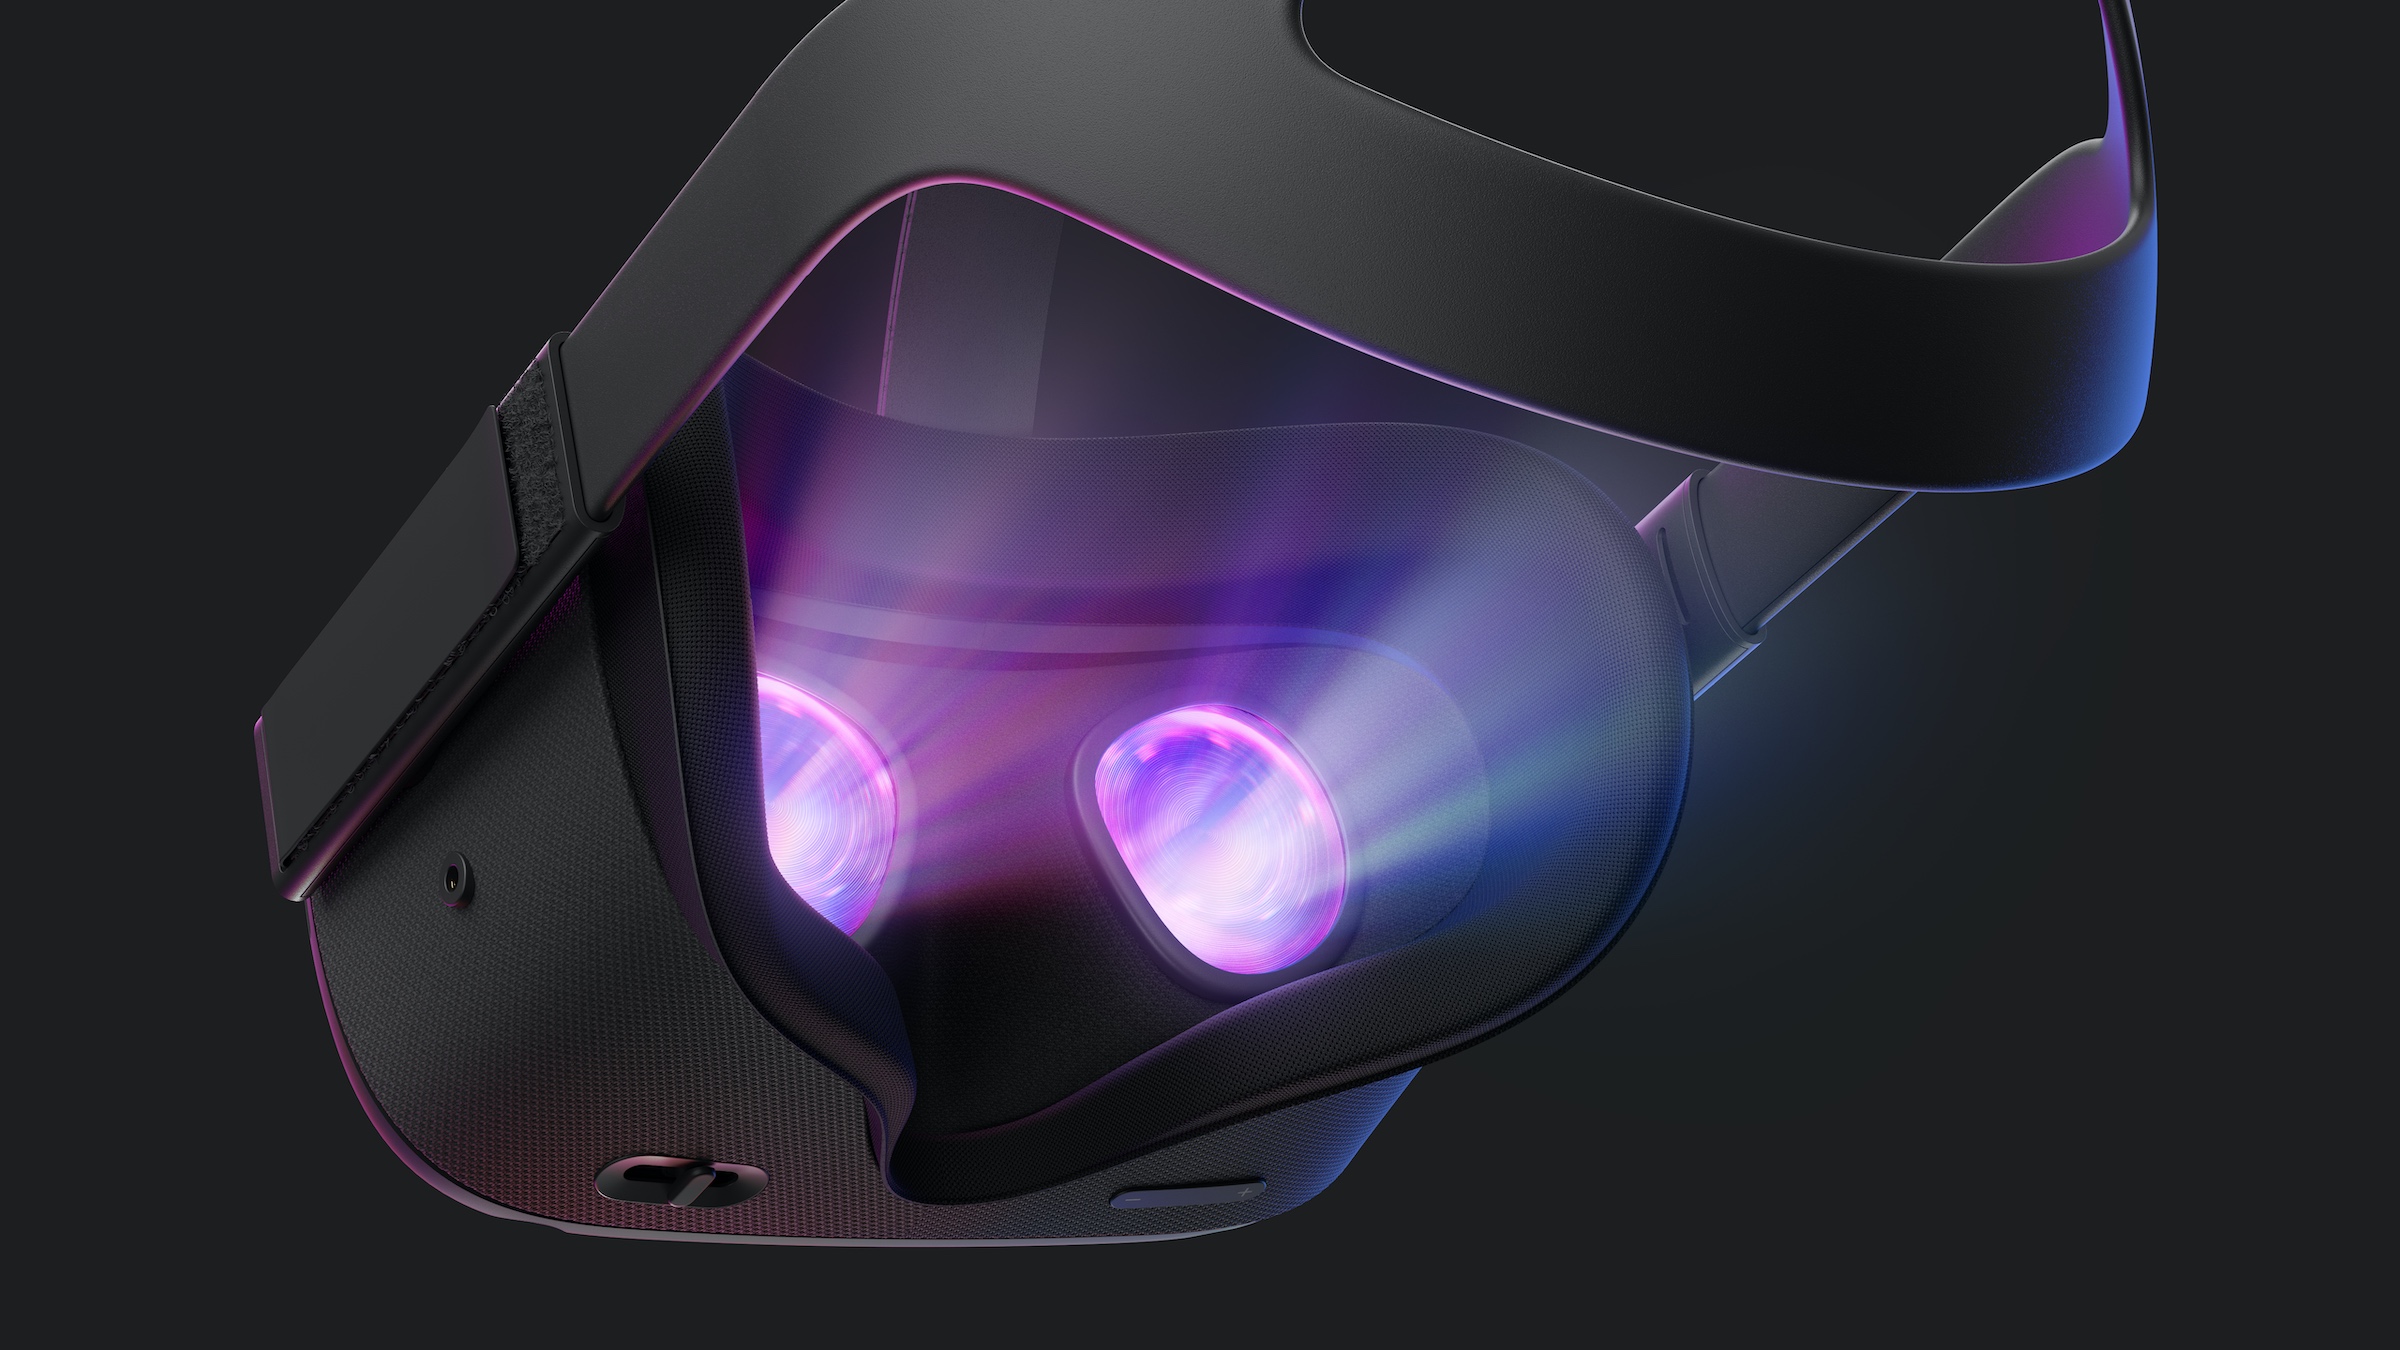 Product photo of the Oculus Quest VR headset with glowing lenses